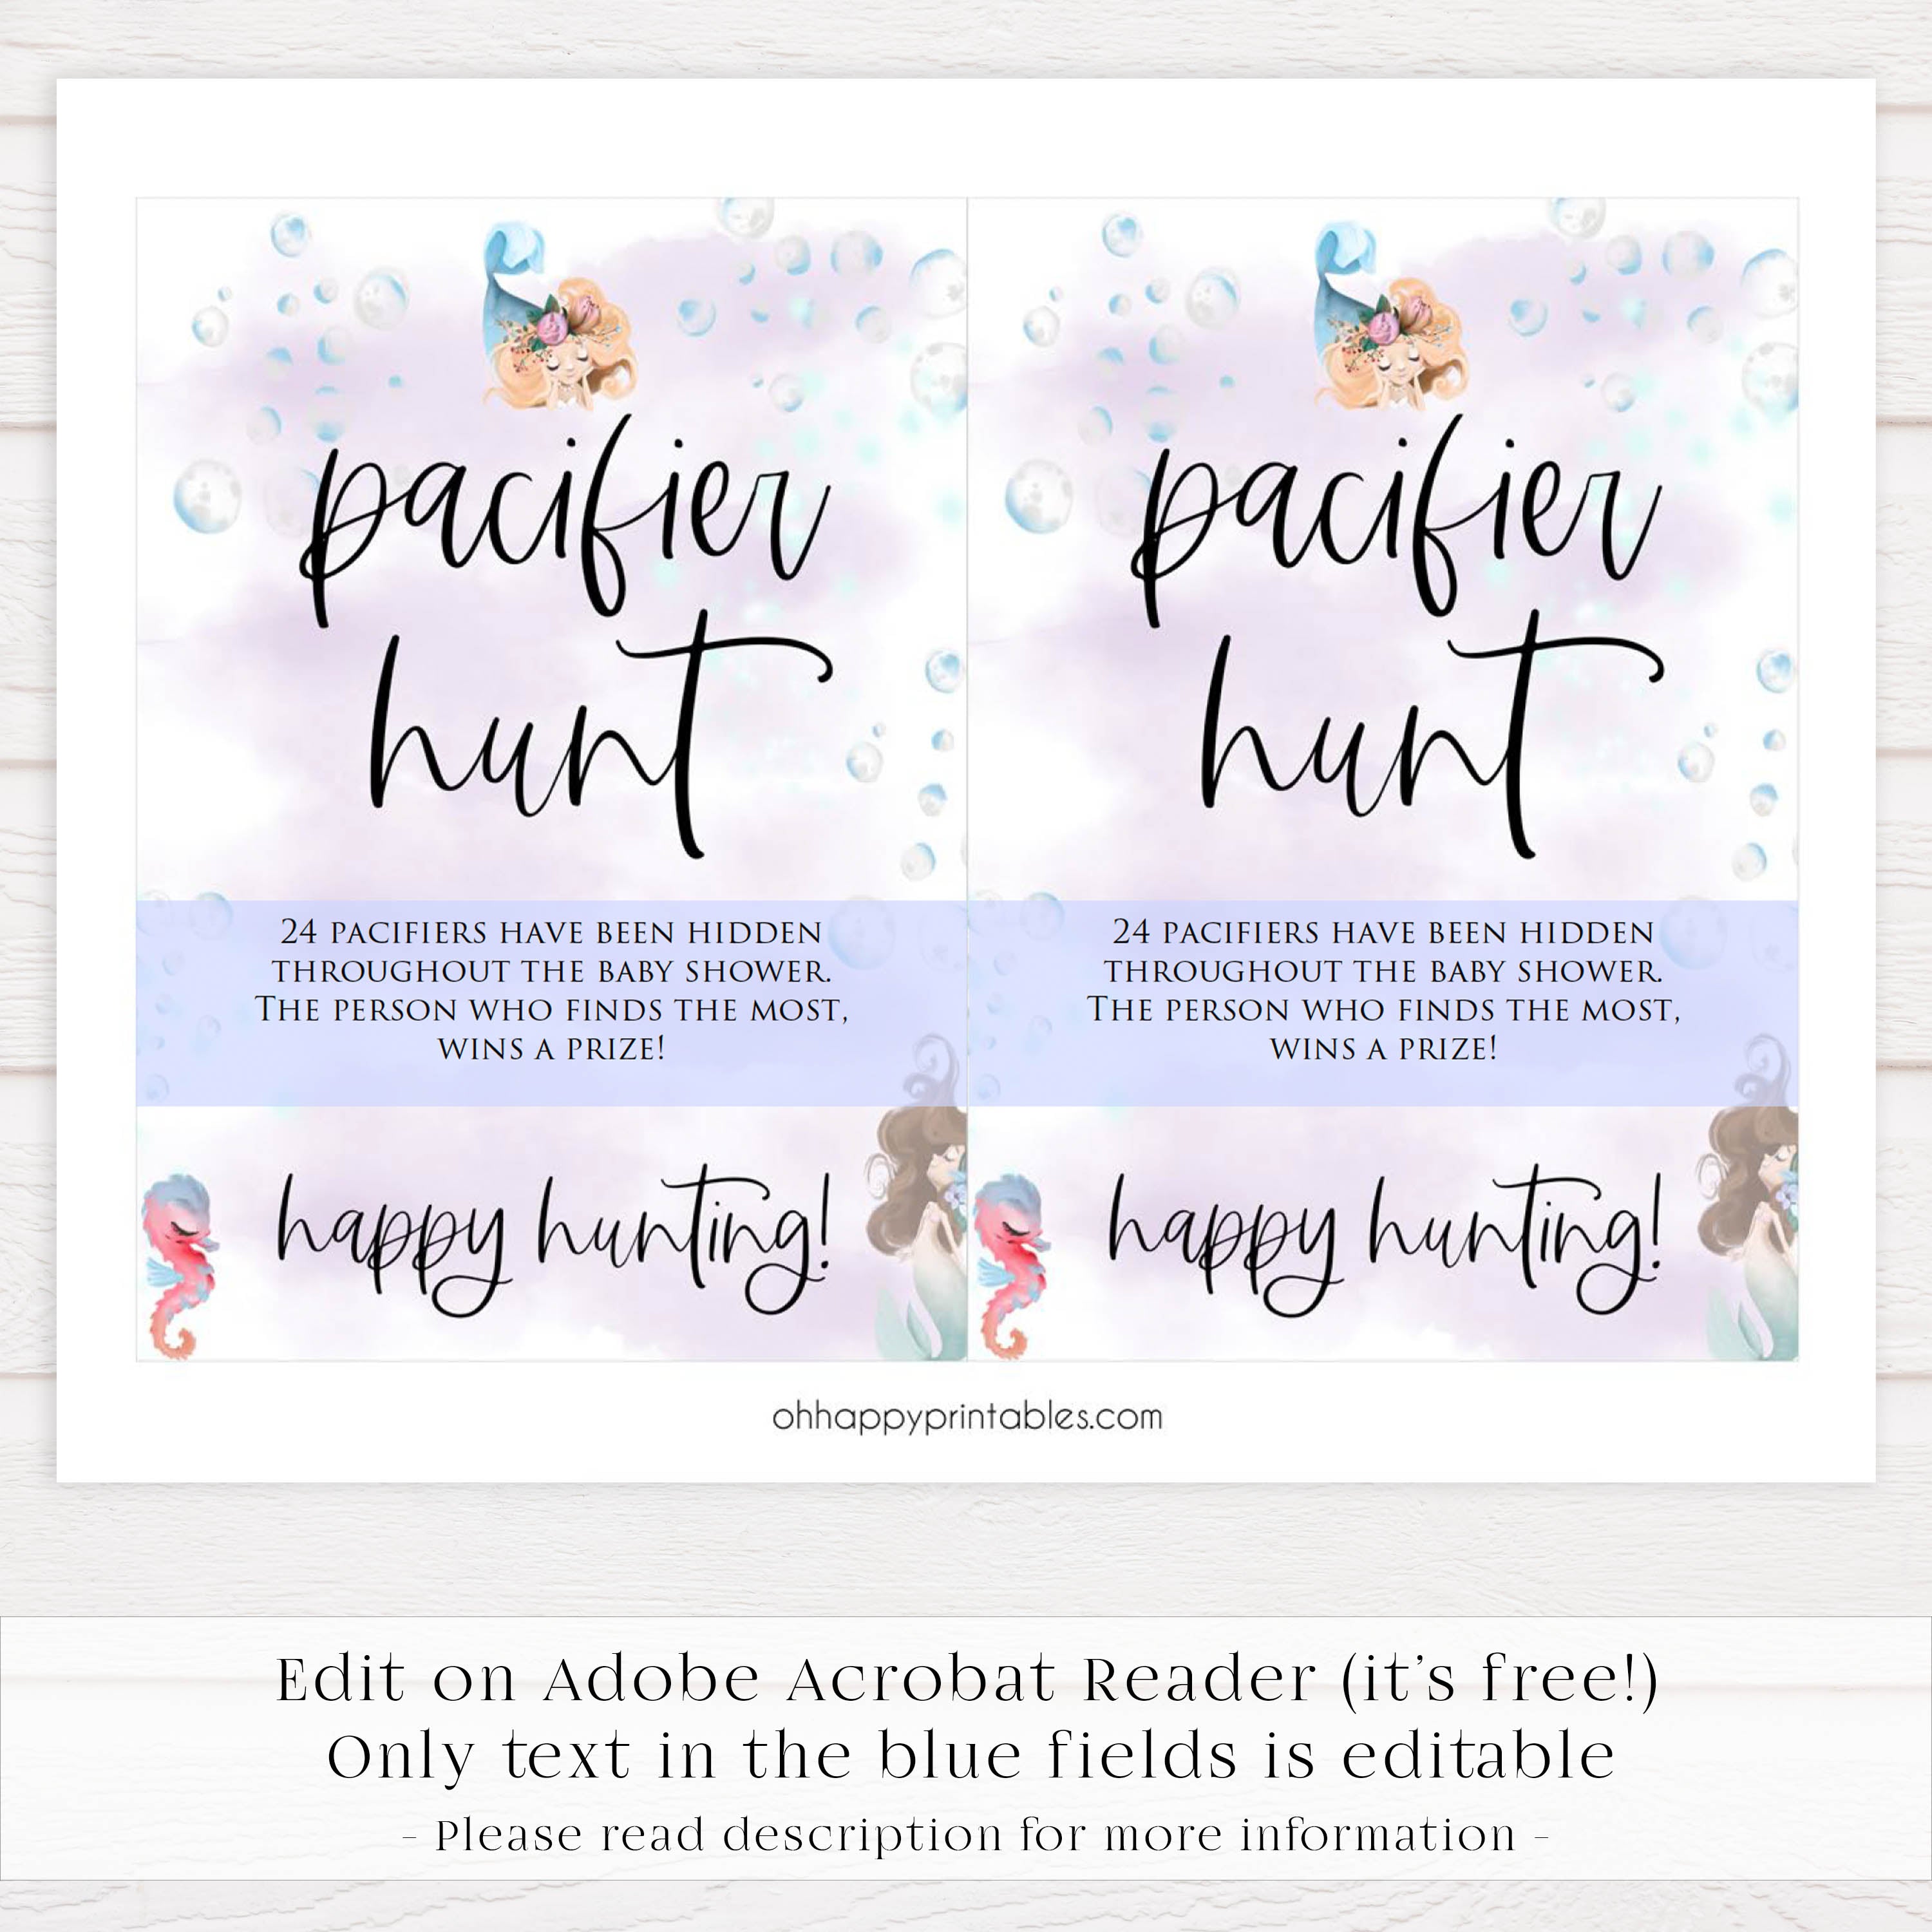 pacifier hunt baby game, Printable baby shower games, little mermaid baby games, baby shower games, fun baby shower ideas, top baby shower ideas, little mermaid baby shower, baby shower games, pink hearts baby shower ideas